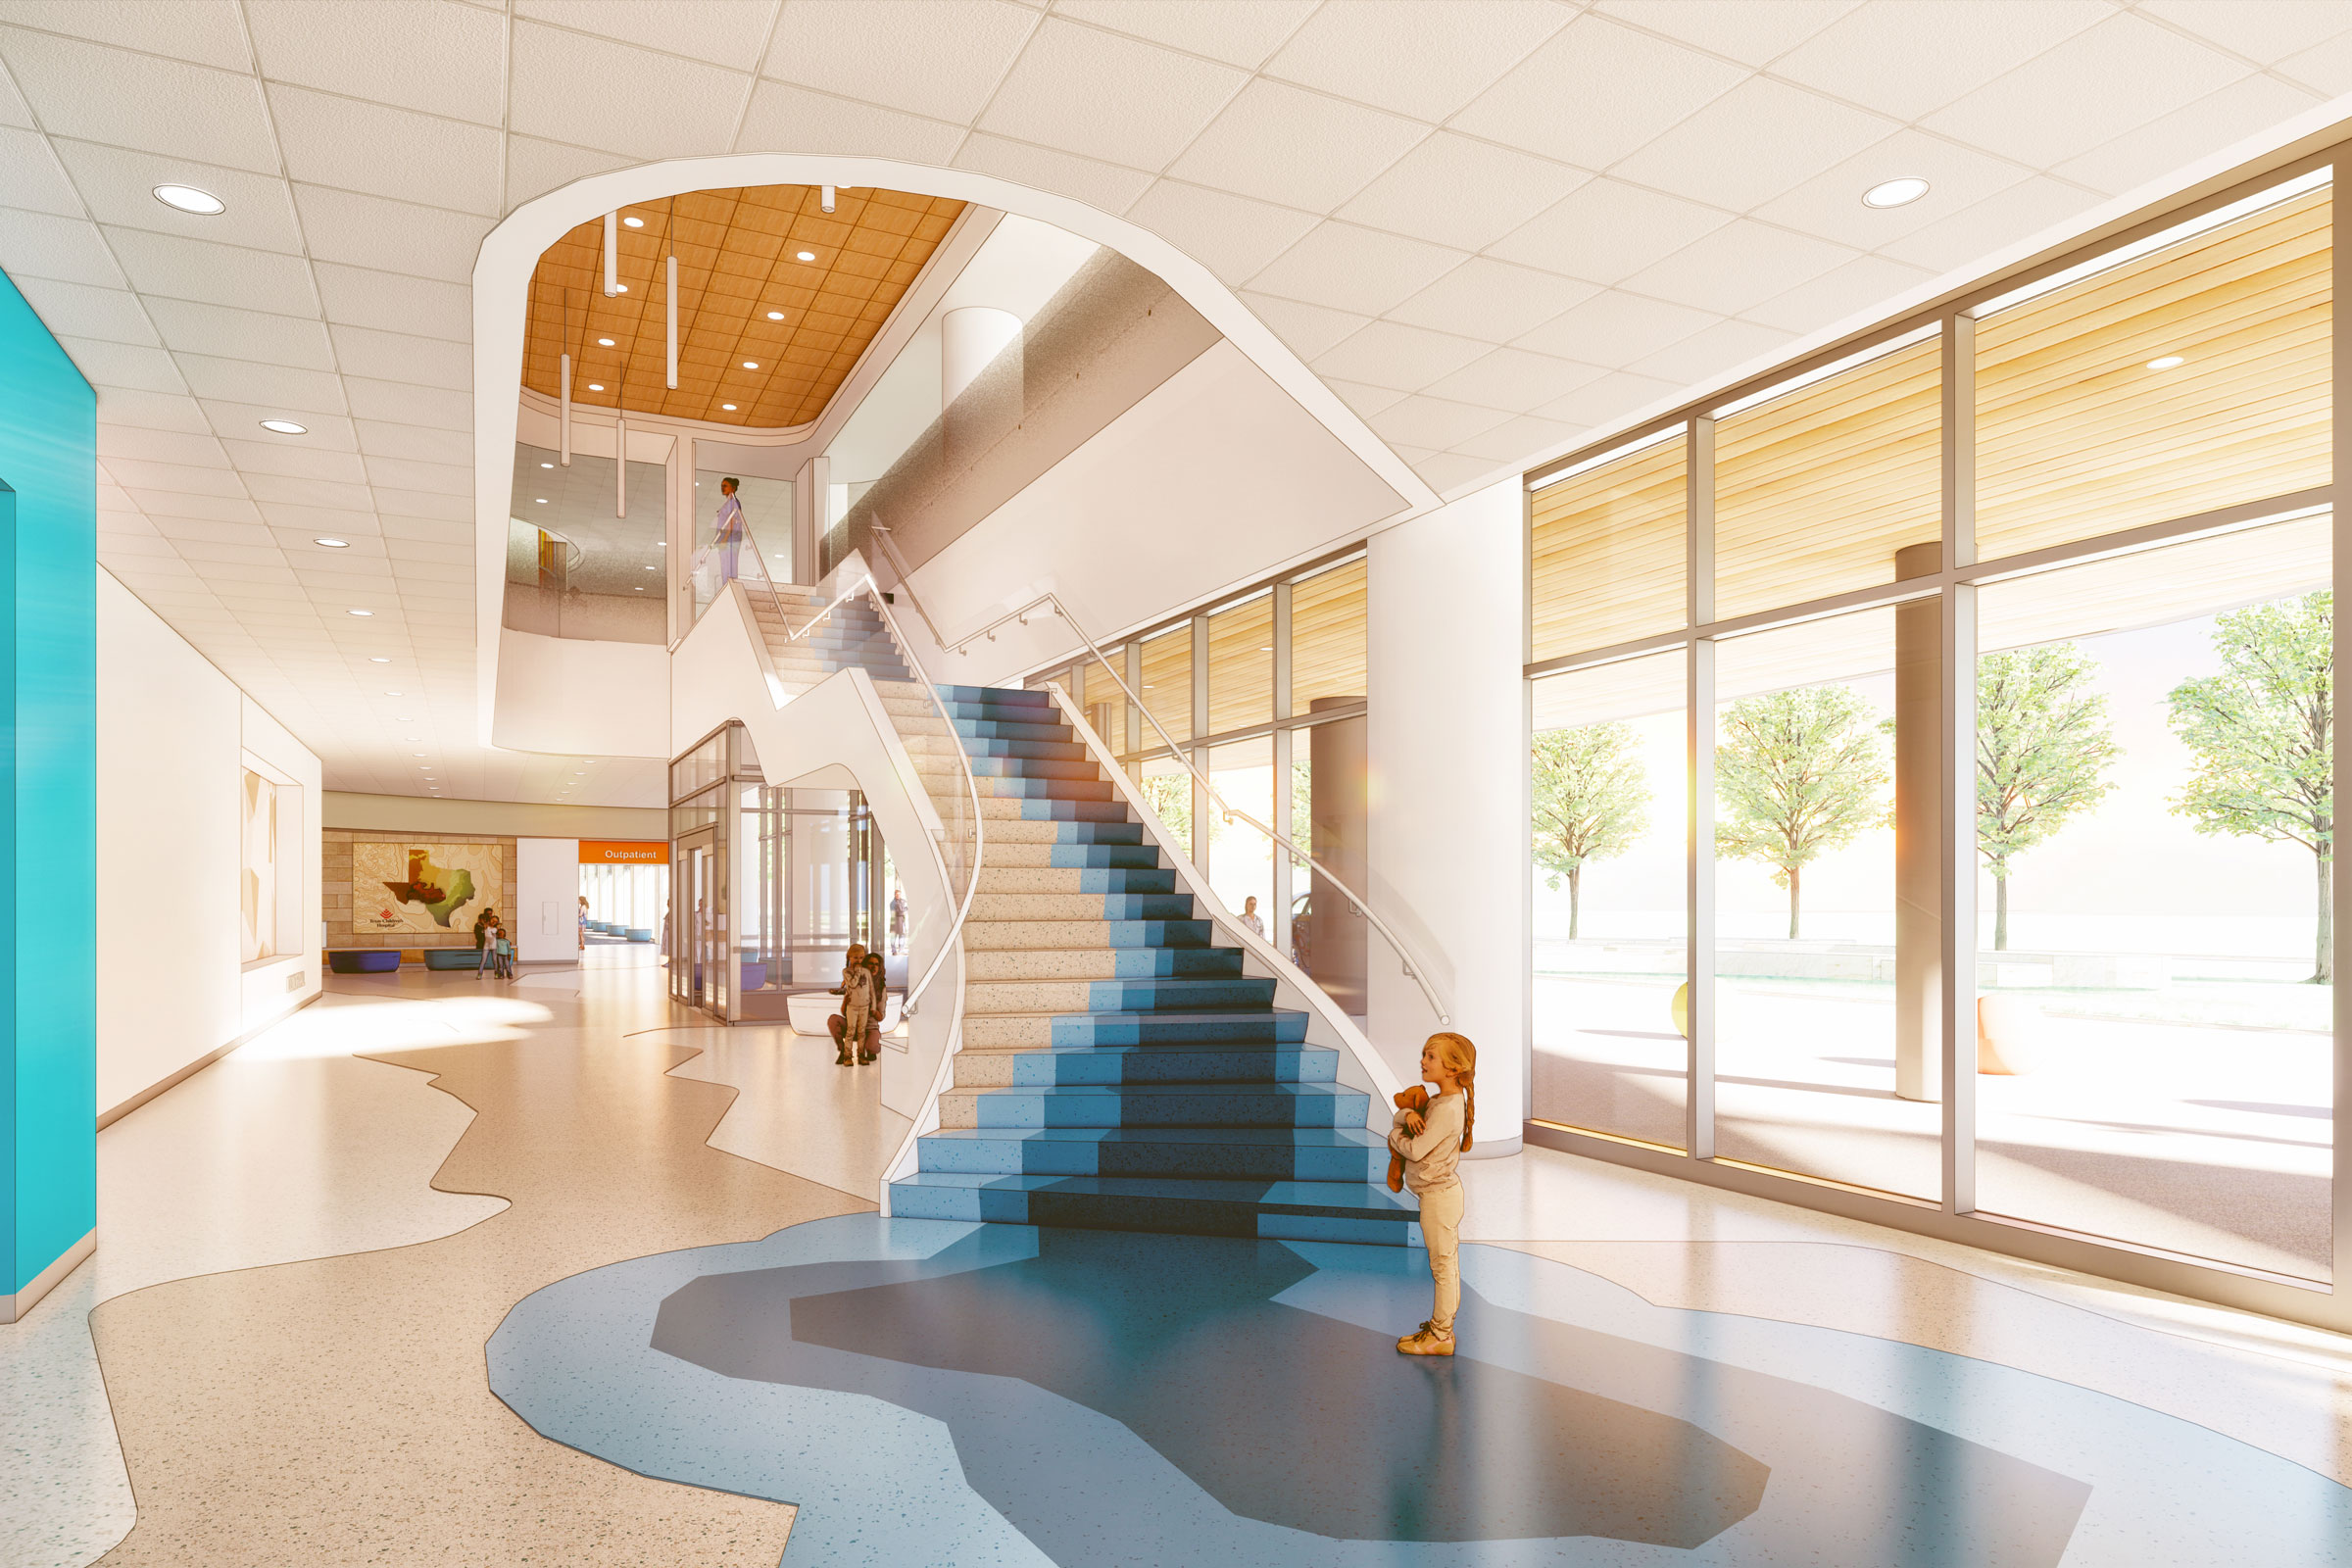 The New Texas Children’s Hospital Design is Making the Wait Less Scary